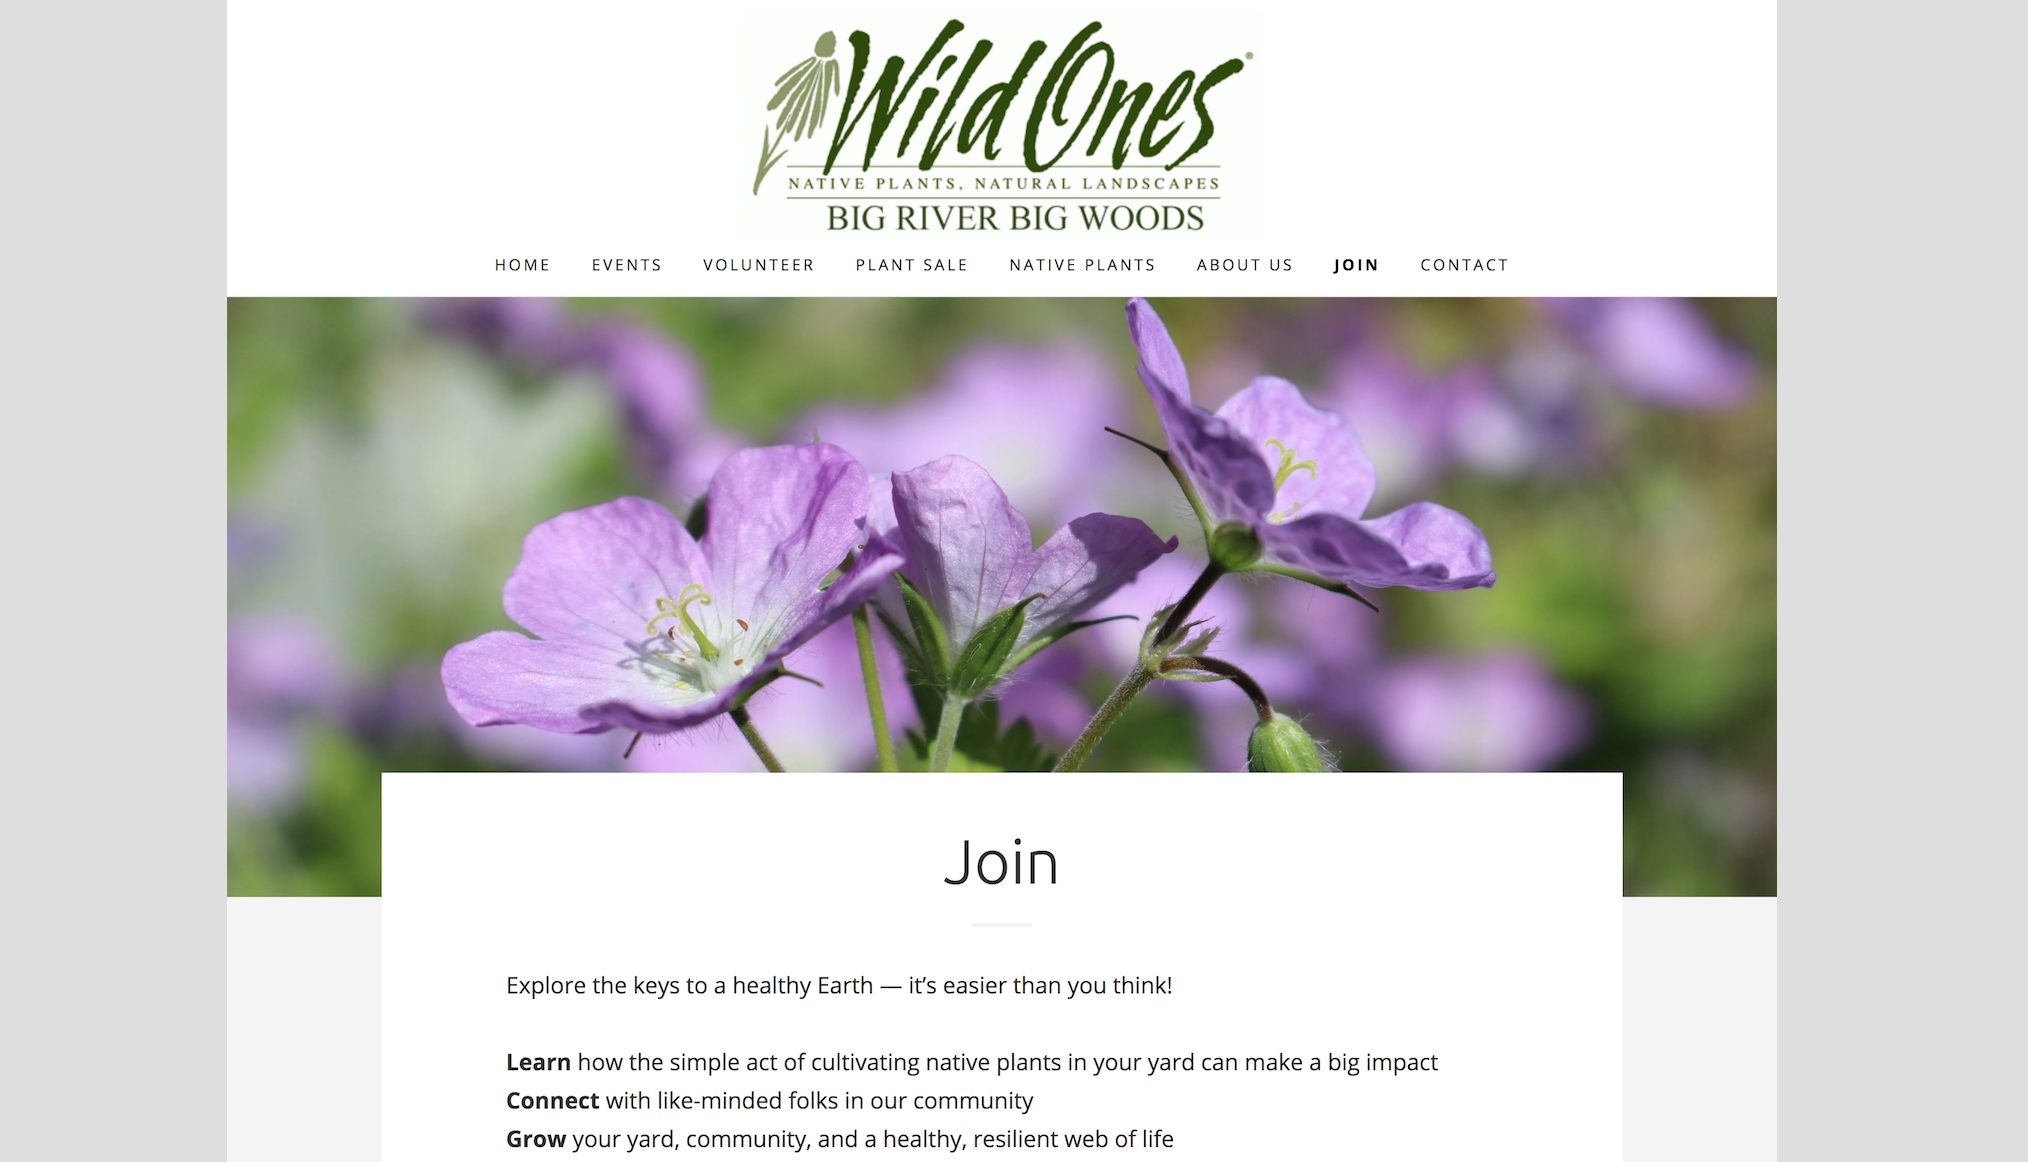 Screen shot of the Wild Ones Big River Big Woods website, with an image of wild geranium near the top.